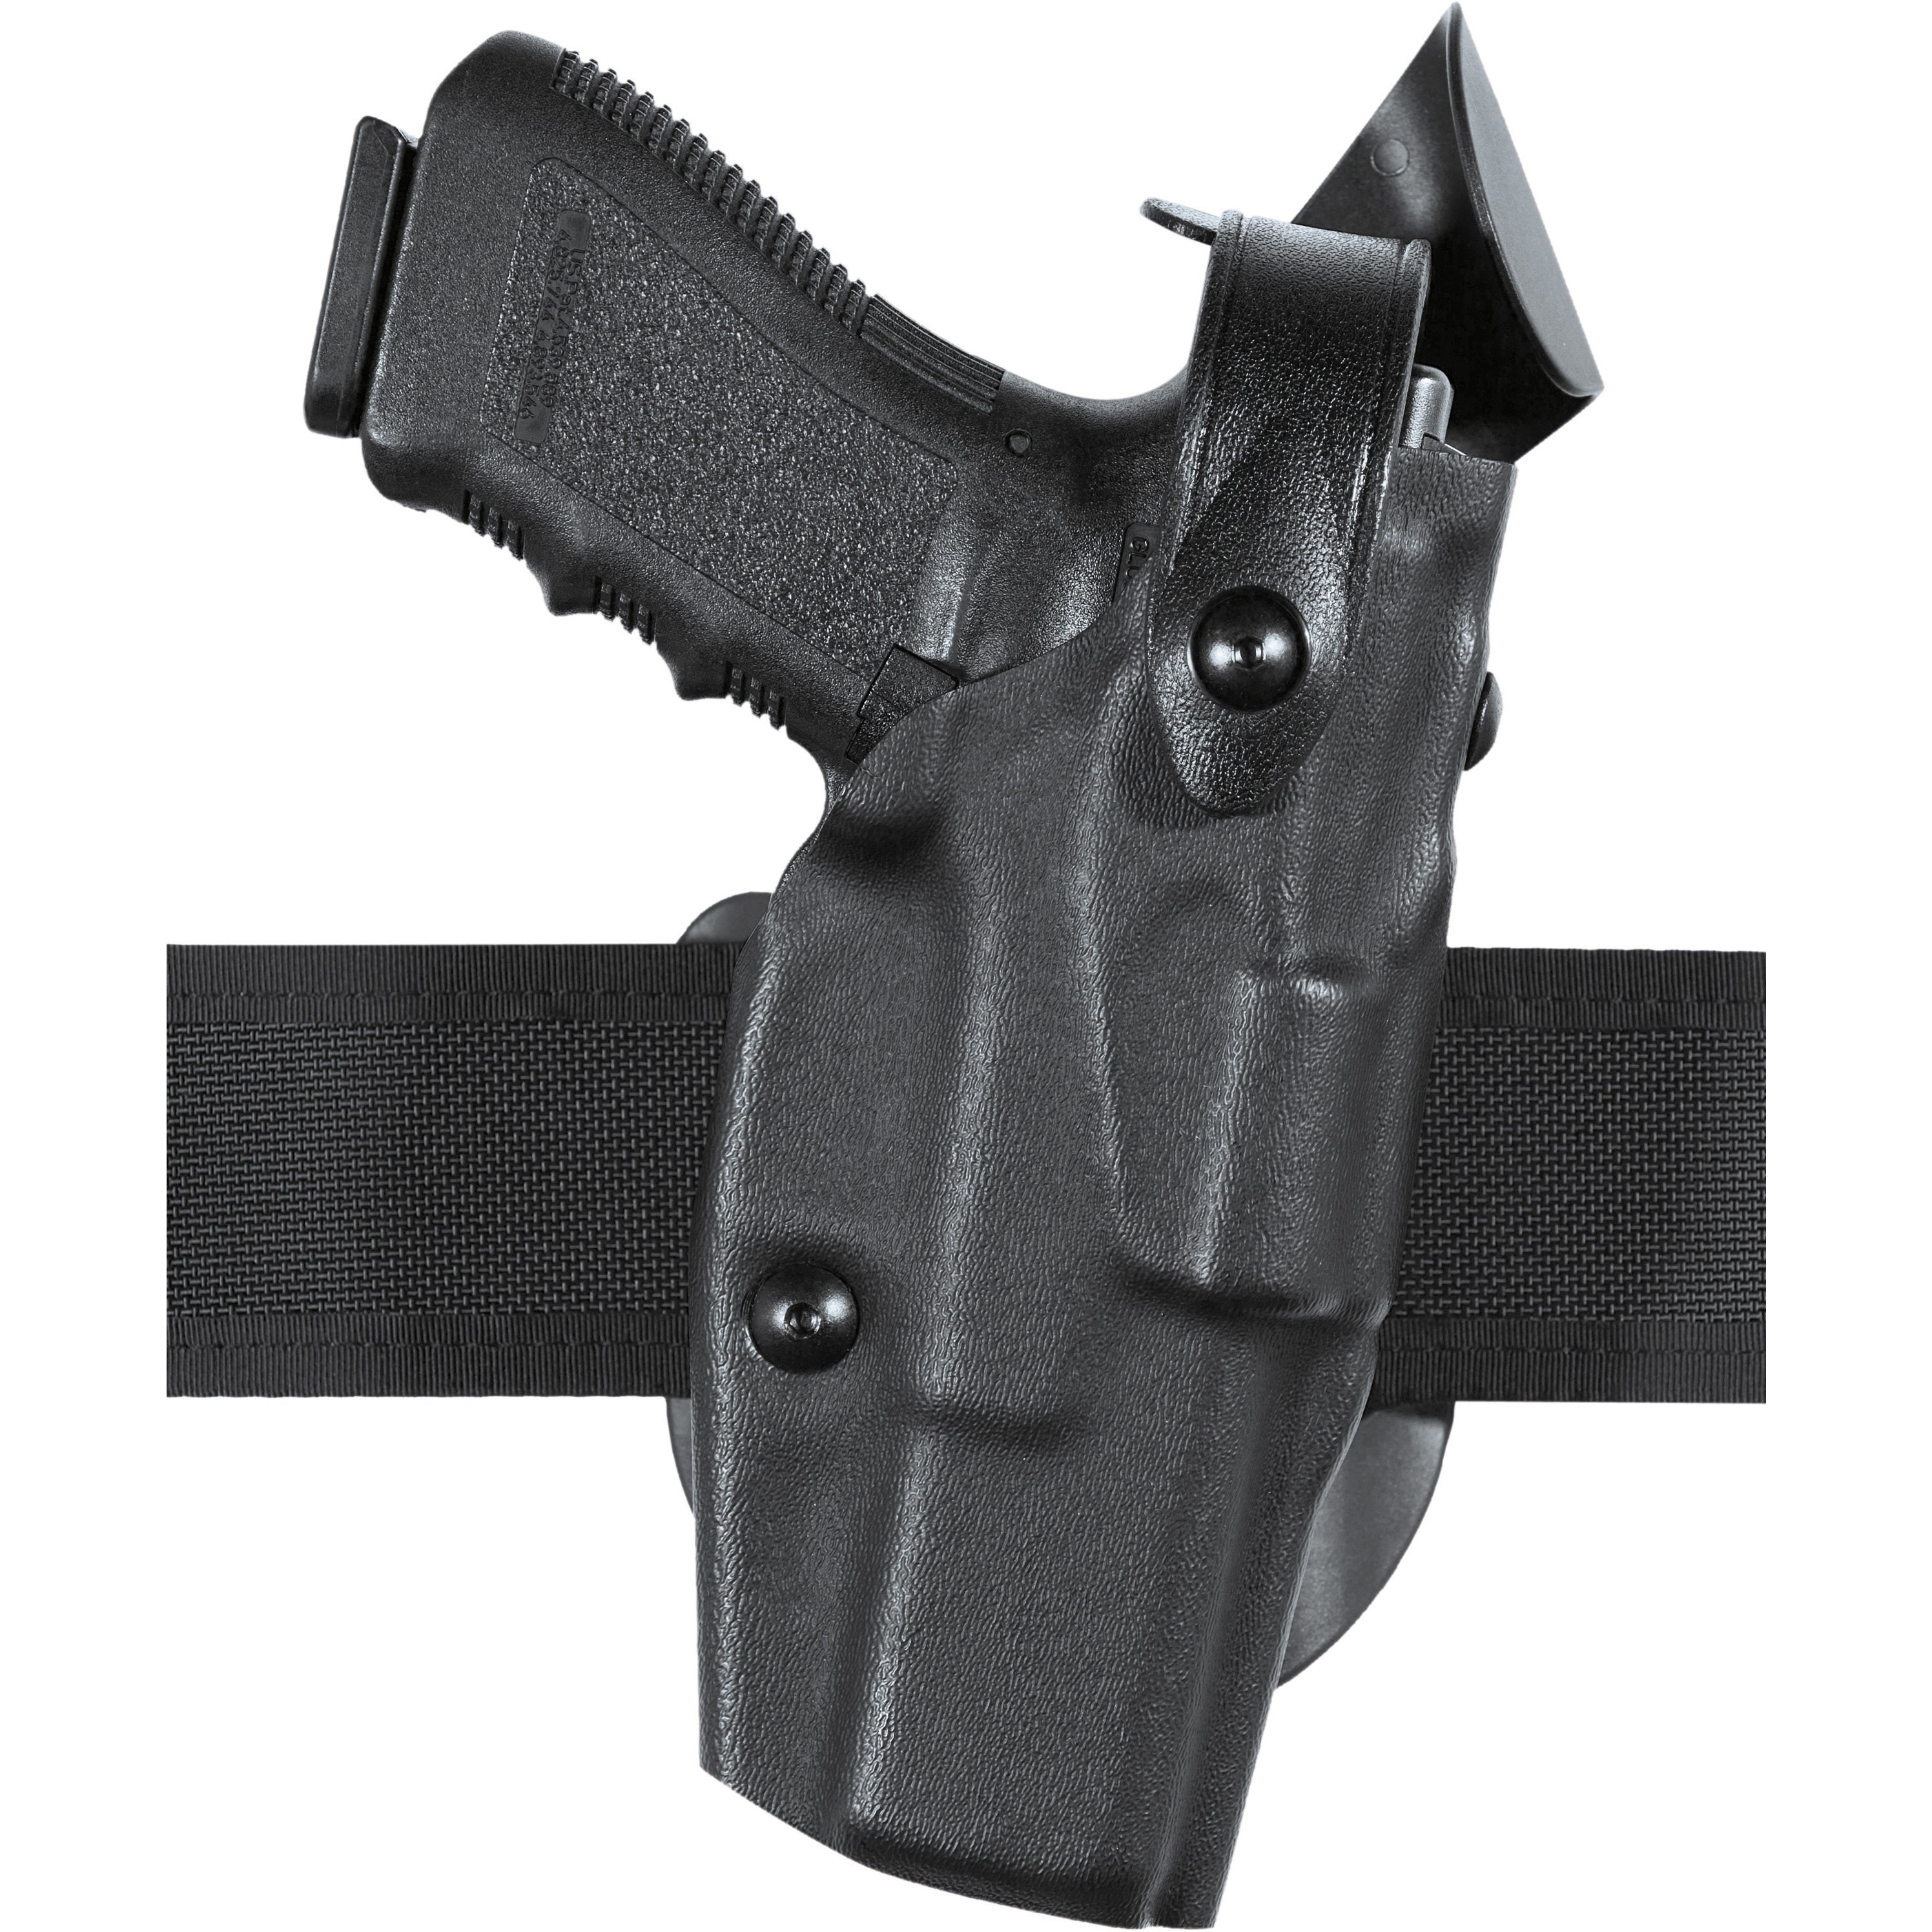 6365RDS ALS®/SLS Low-Ride, Level III Retention™ Duty Holster